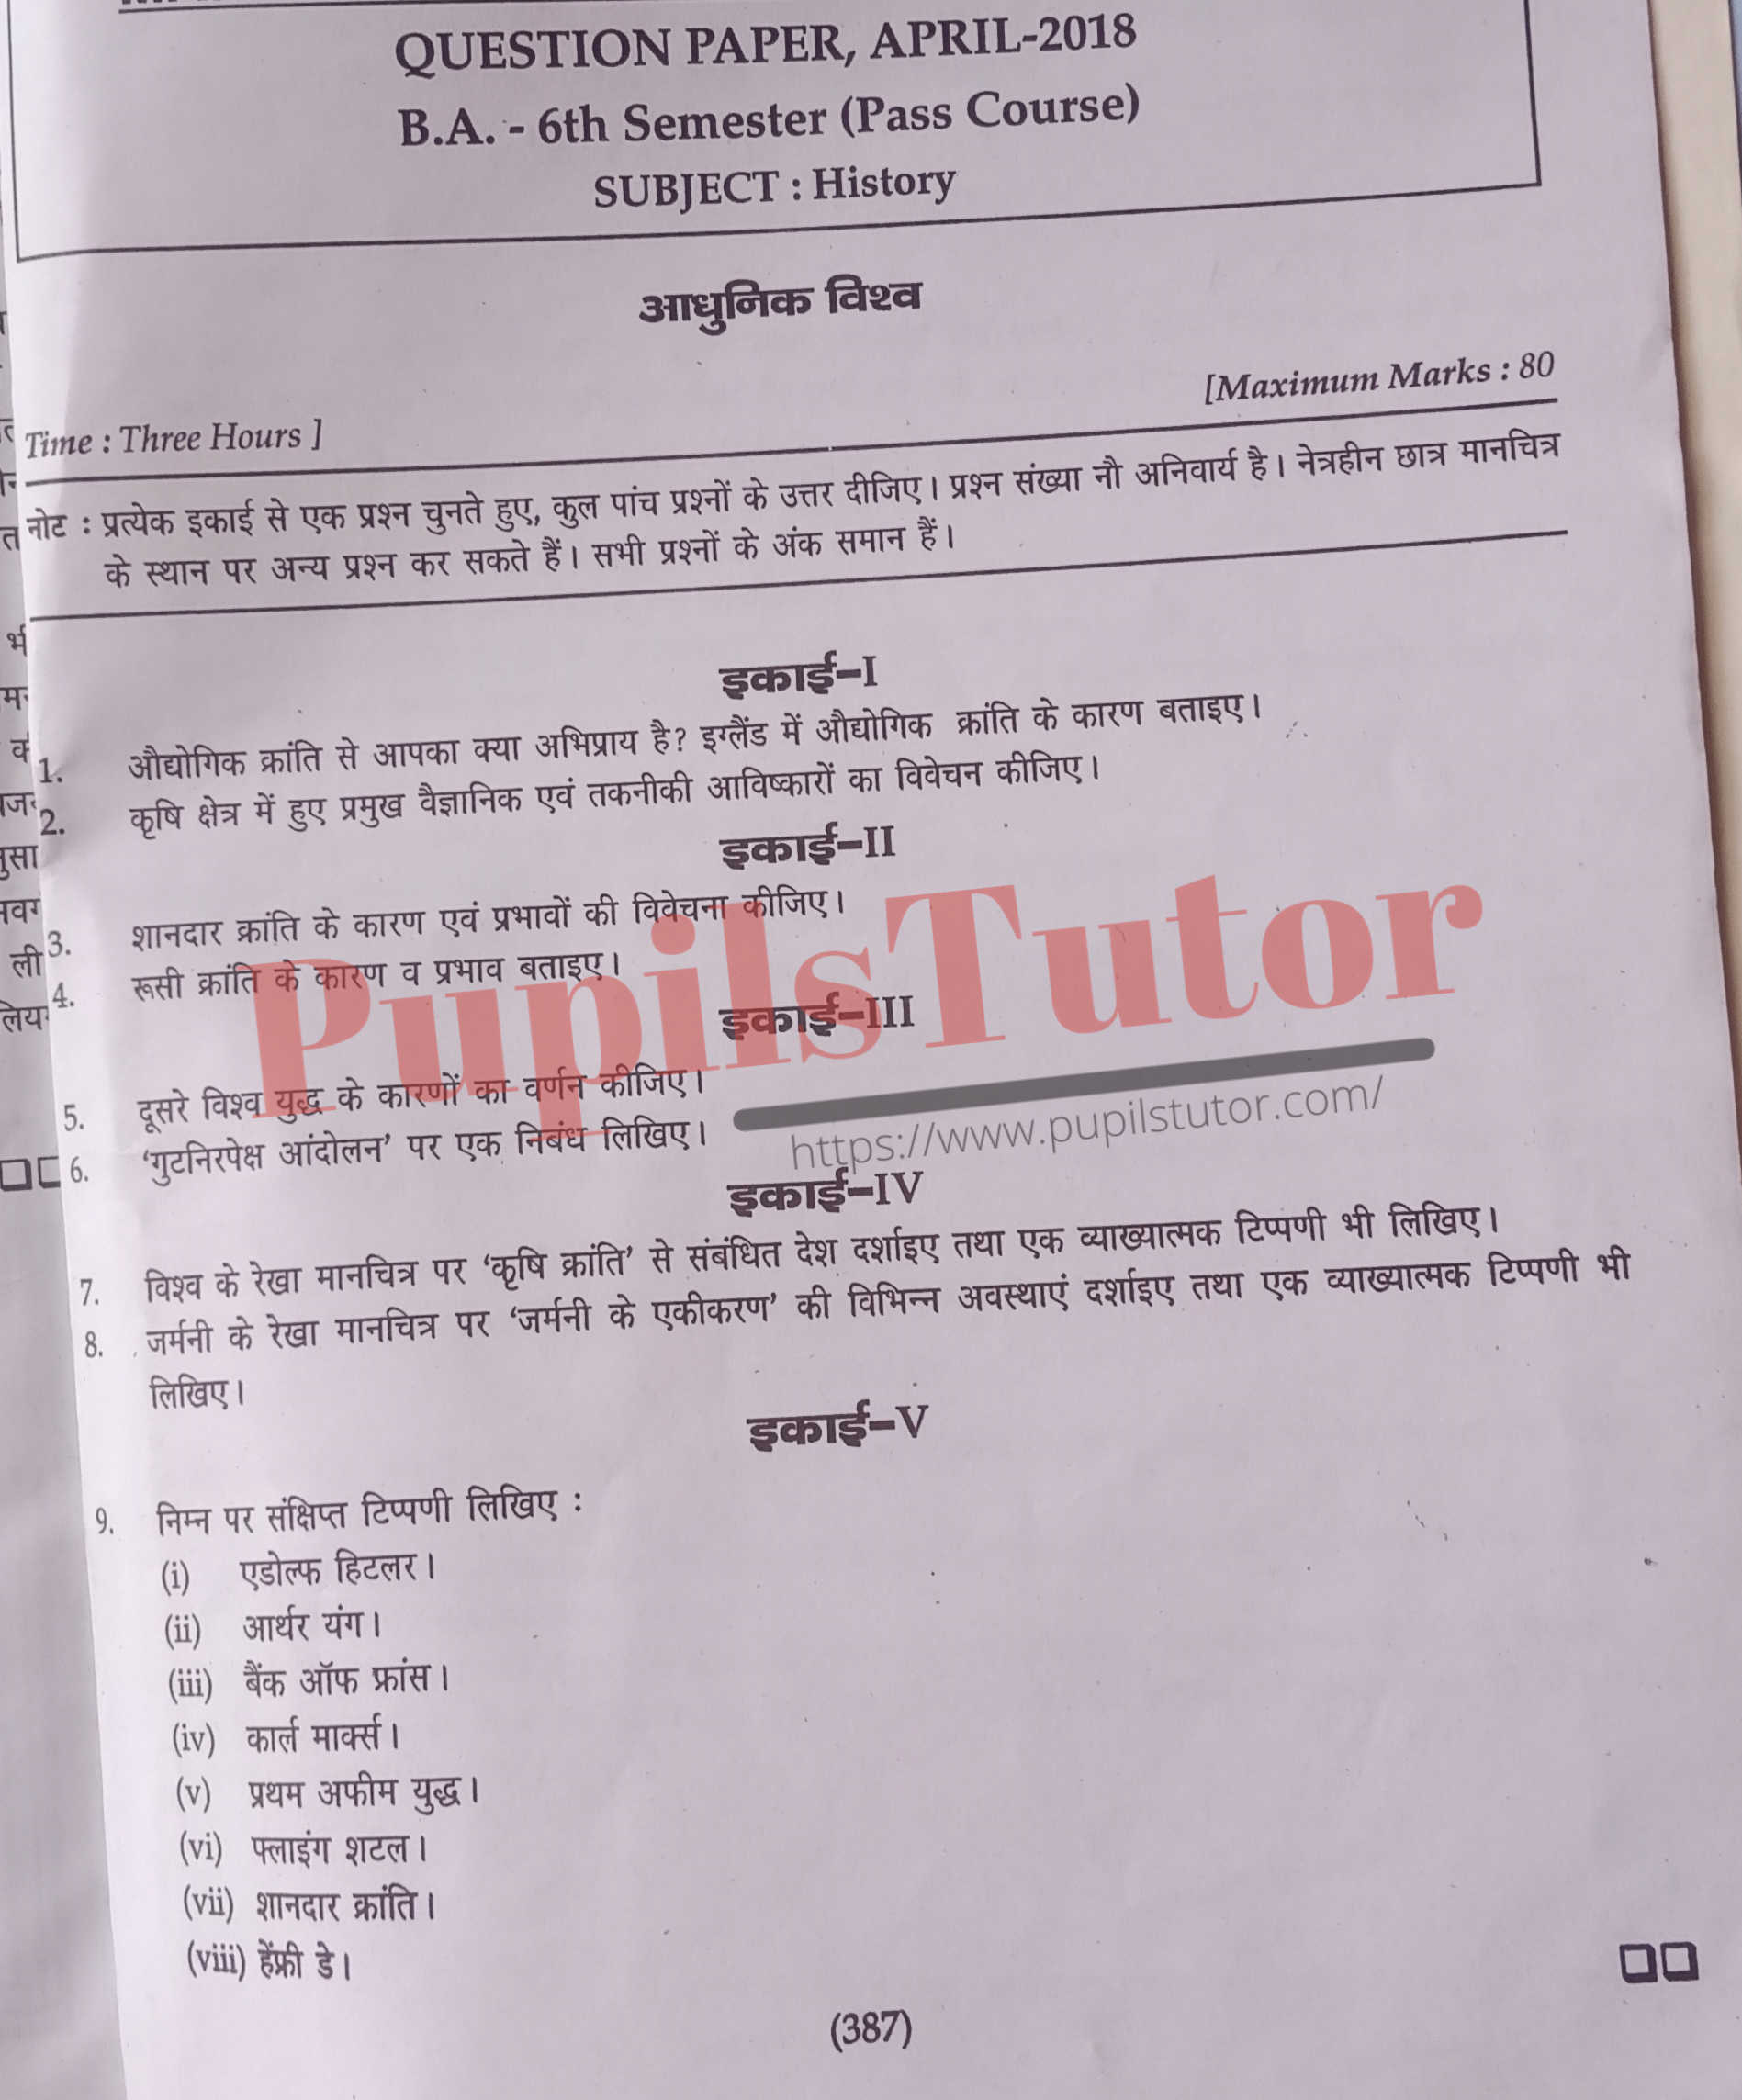 MDU (Maharshi Dayanand University, Rohtak Haryana) BA Pass Course Sixth Semester Previous Year History Question Paper For April, 2018 Exam (Question Paper Page 1) - pupilstutor.com